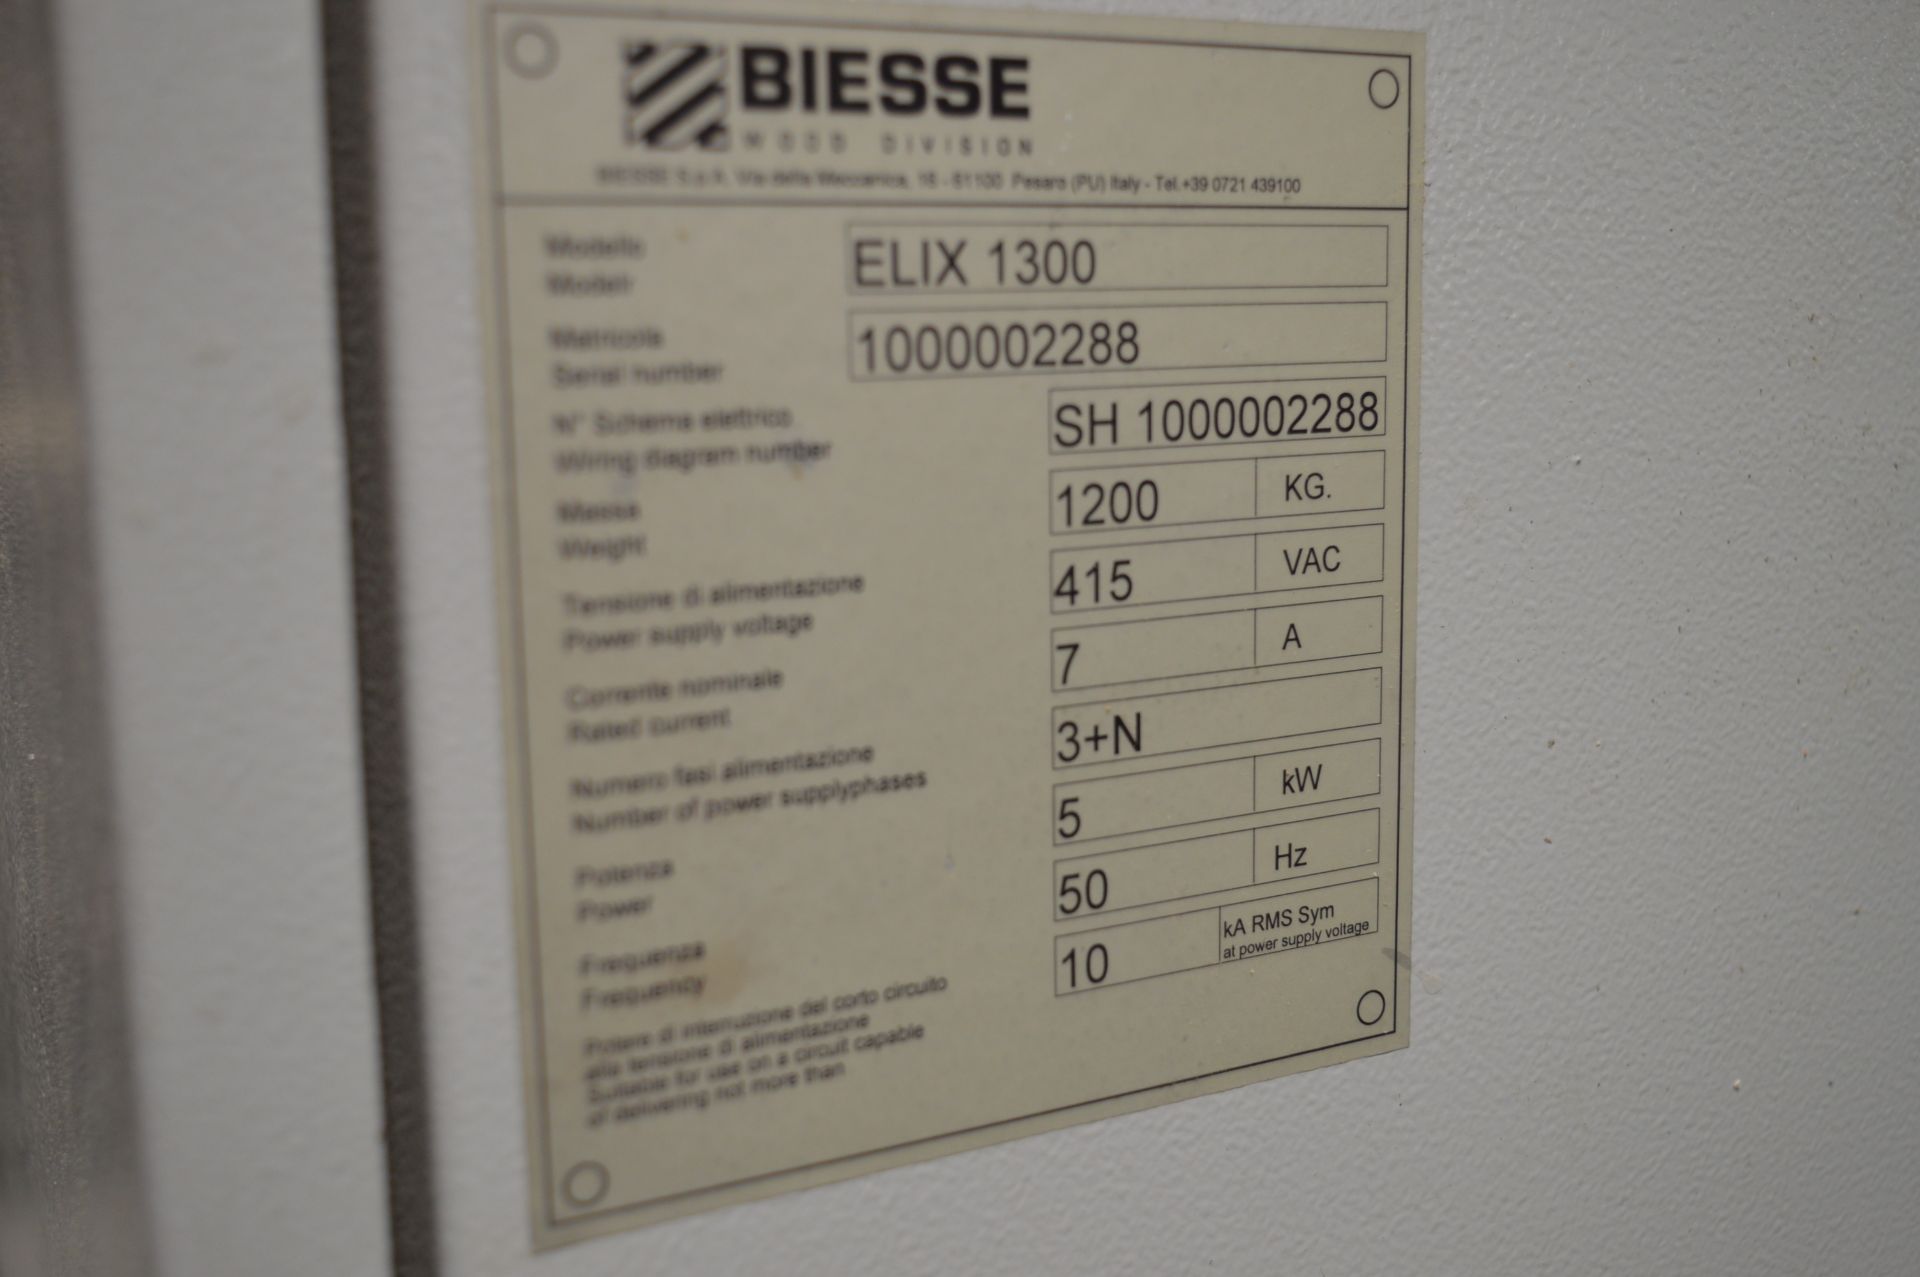 Biesse, Elix 1300 K4 CNC point to point dowel drilling and insertion machine, Serial No. - Image 10 of 12